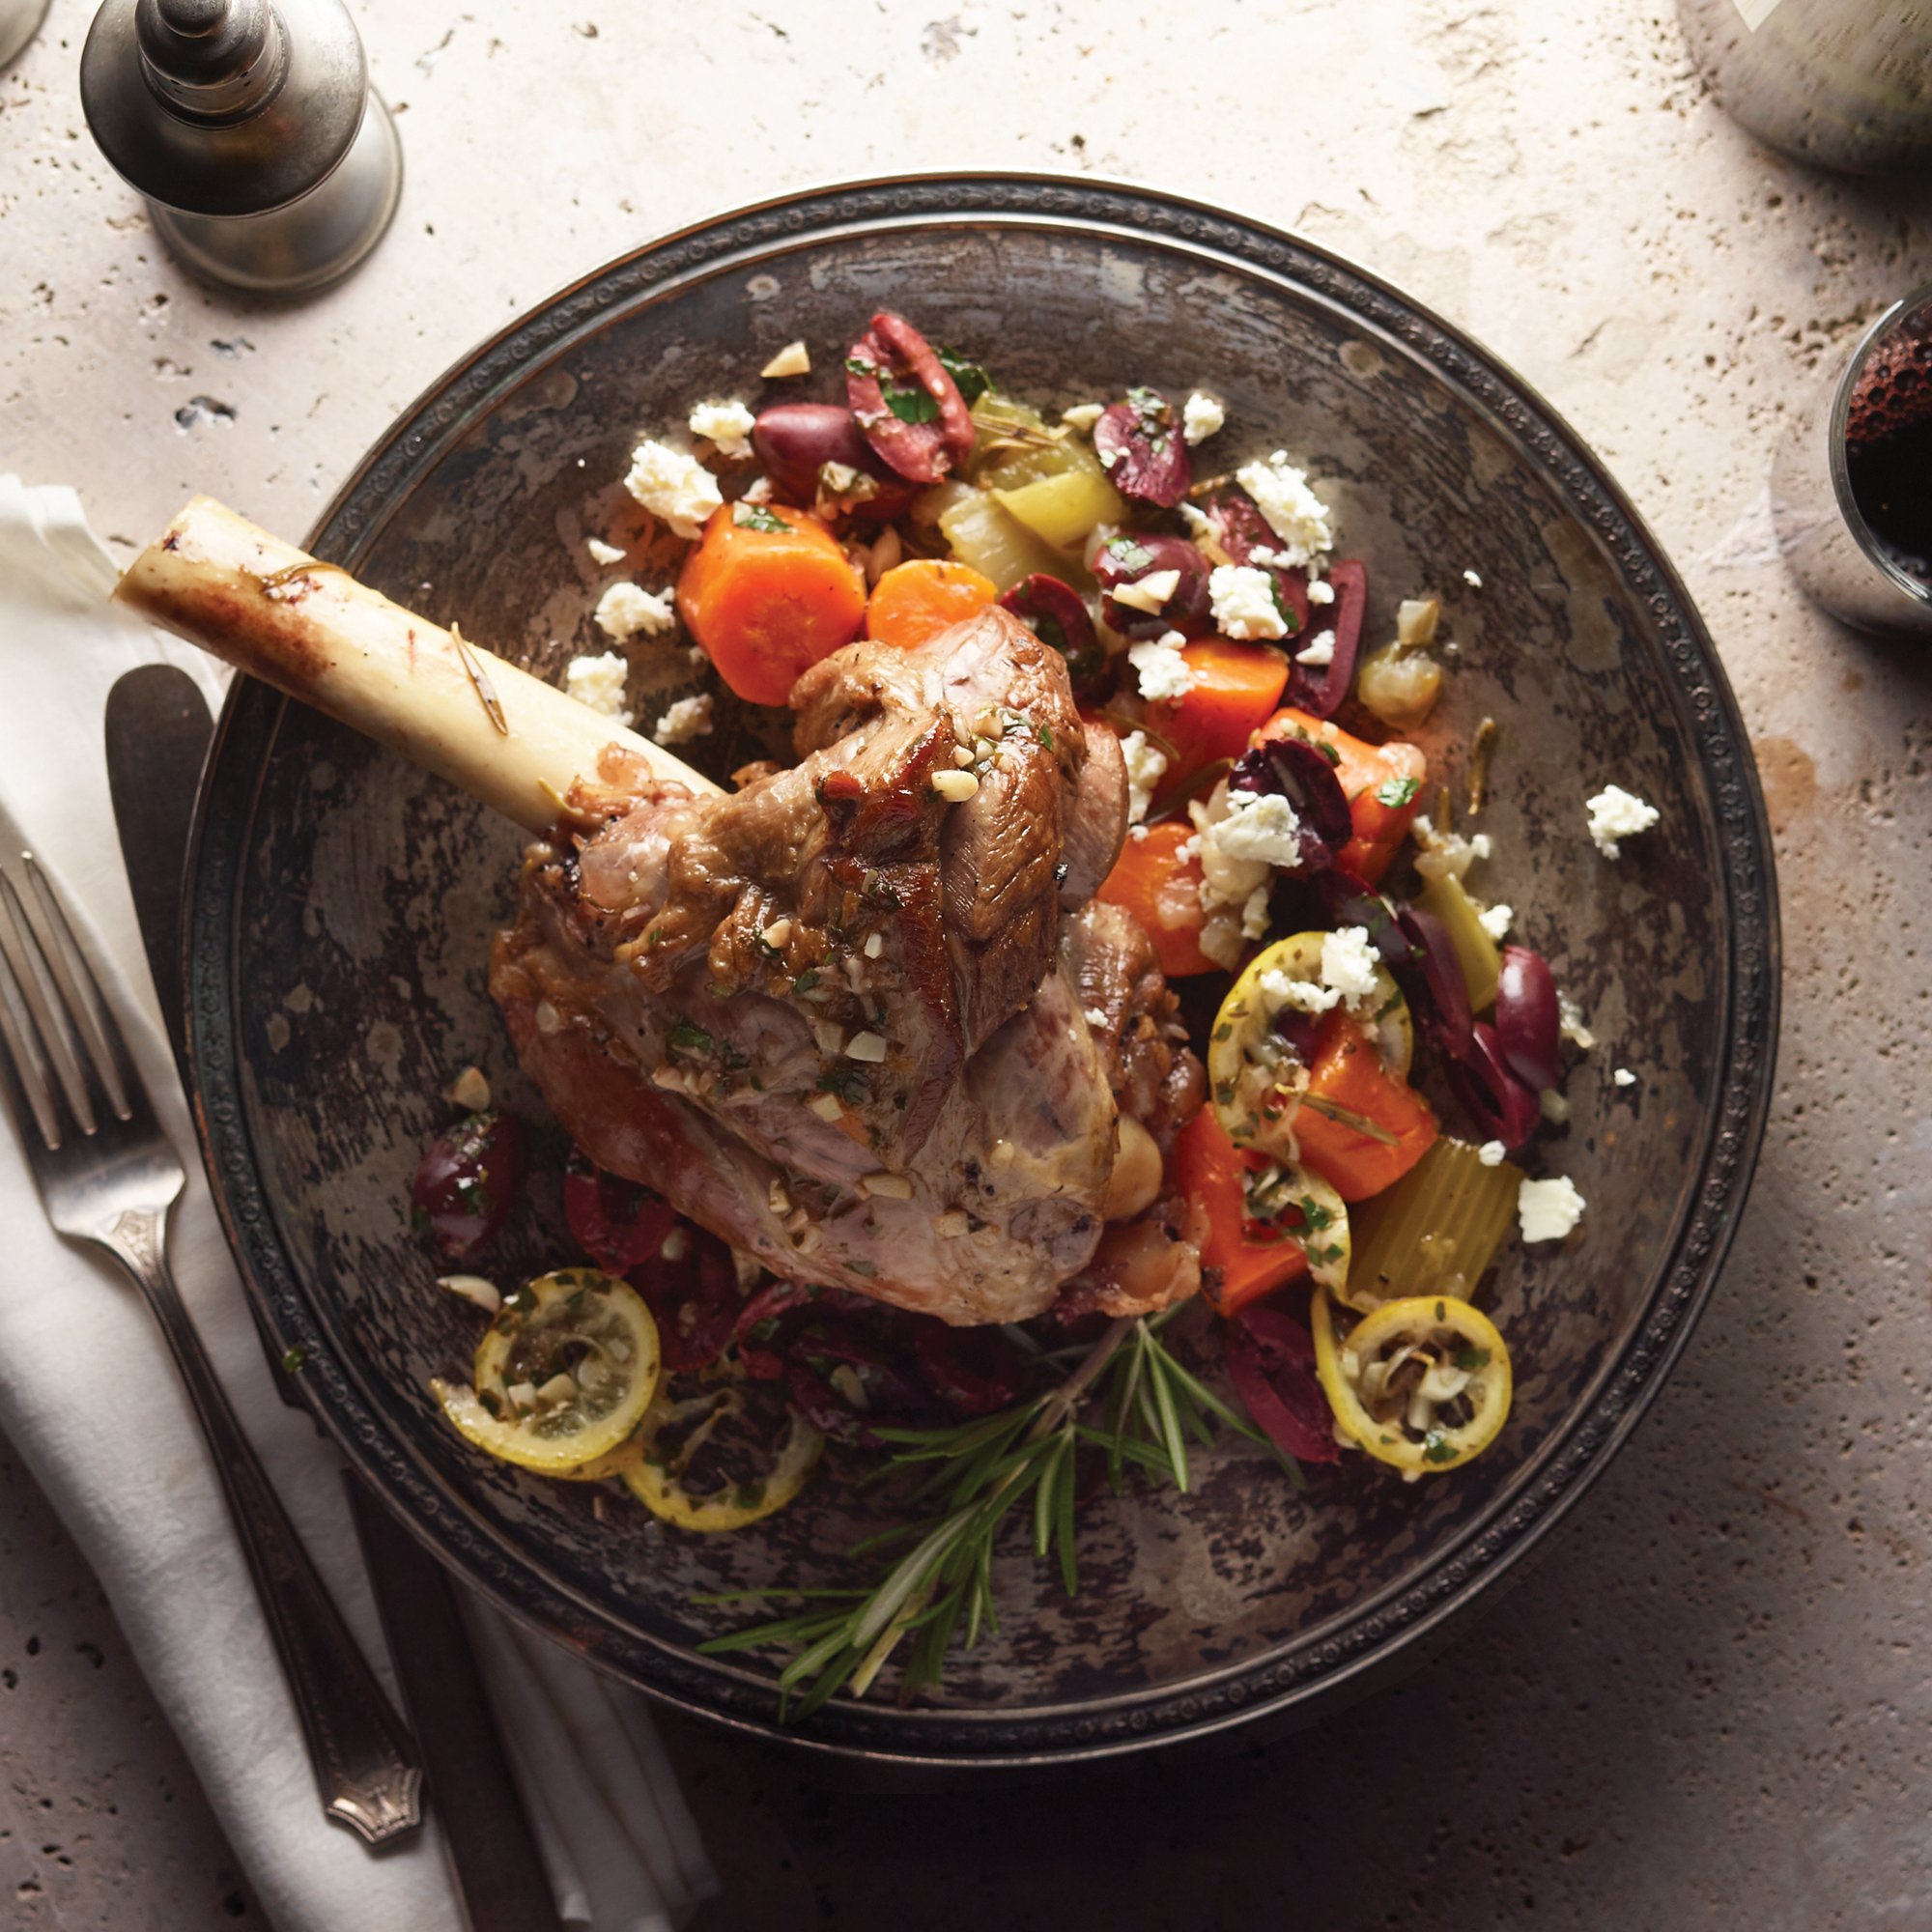 https://images.heb.com/is/image/HEBGrocery/recipe-hm-large/rosemary-lamb-shanks-with-warm-olive-gremolata-instant-pot--recipe.jpg